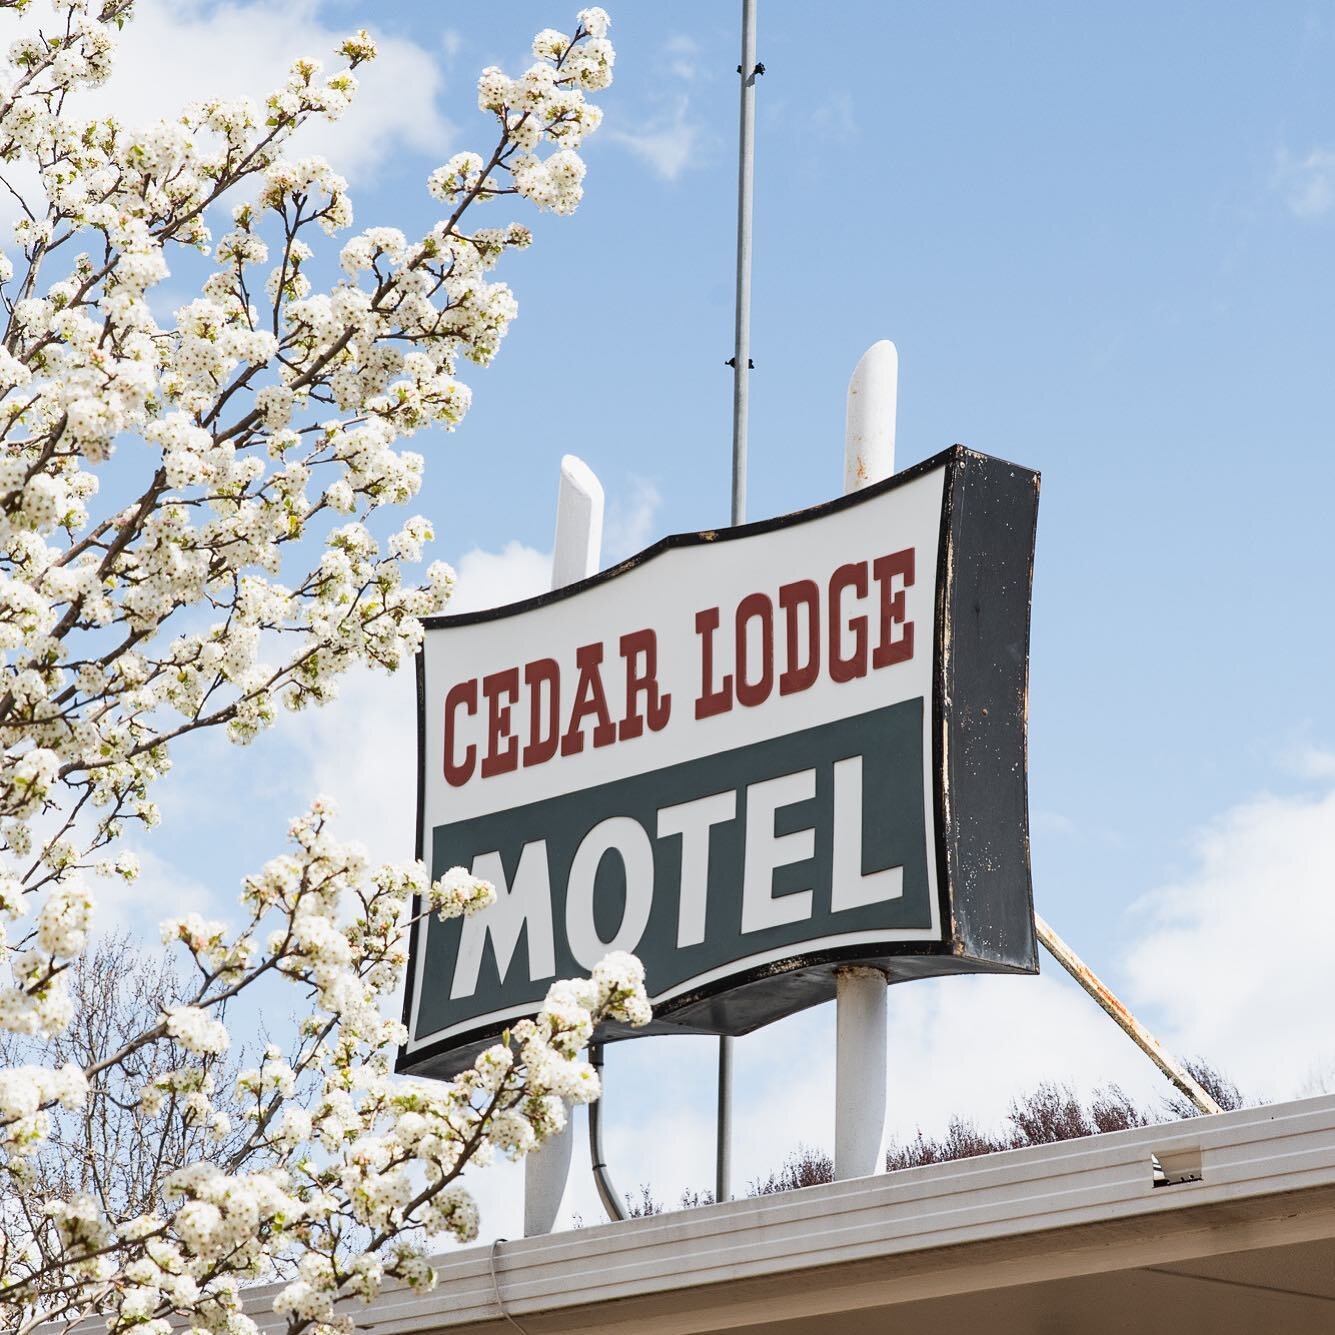 Only a stone's throw from the main street of town, Cedar Lodge is positioned perfectly for those travellers wanting to rest their heads mid journey or for those who want to stay a while and explore Braidwood